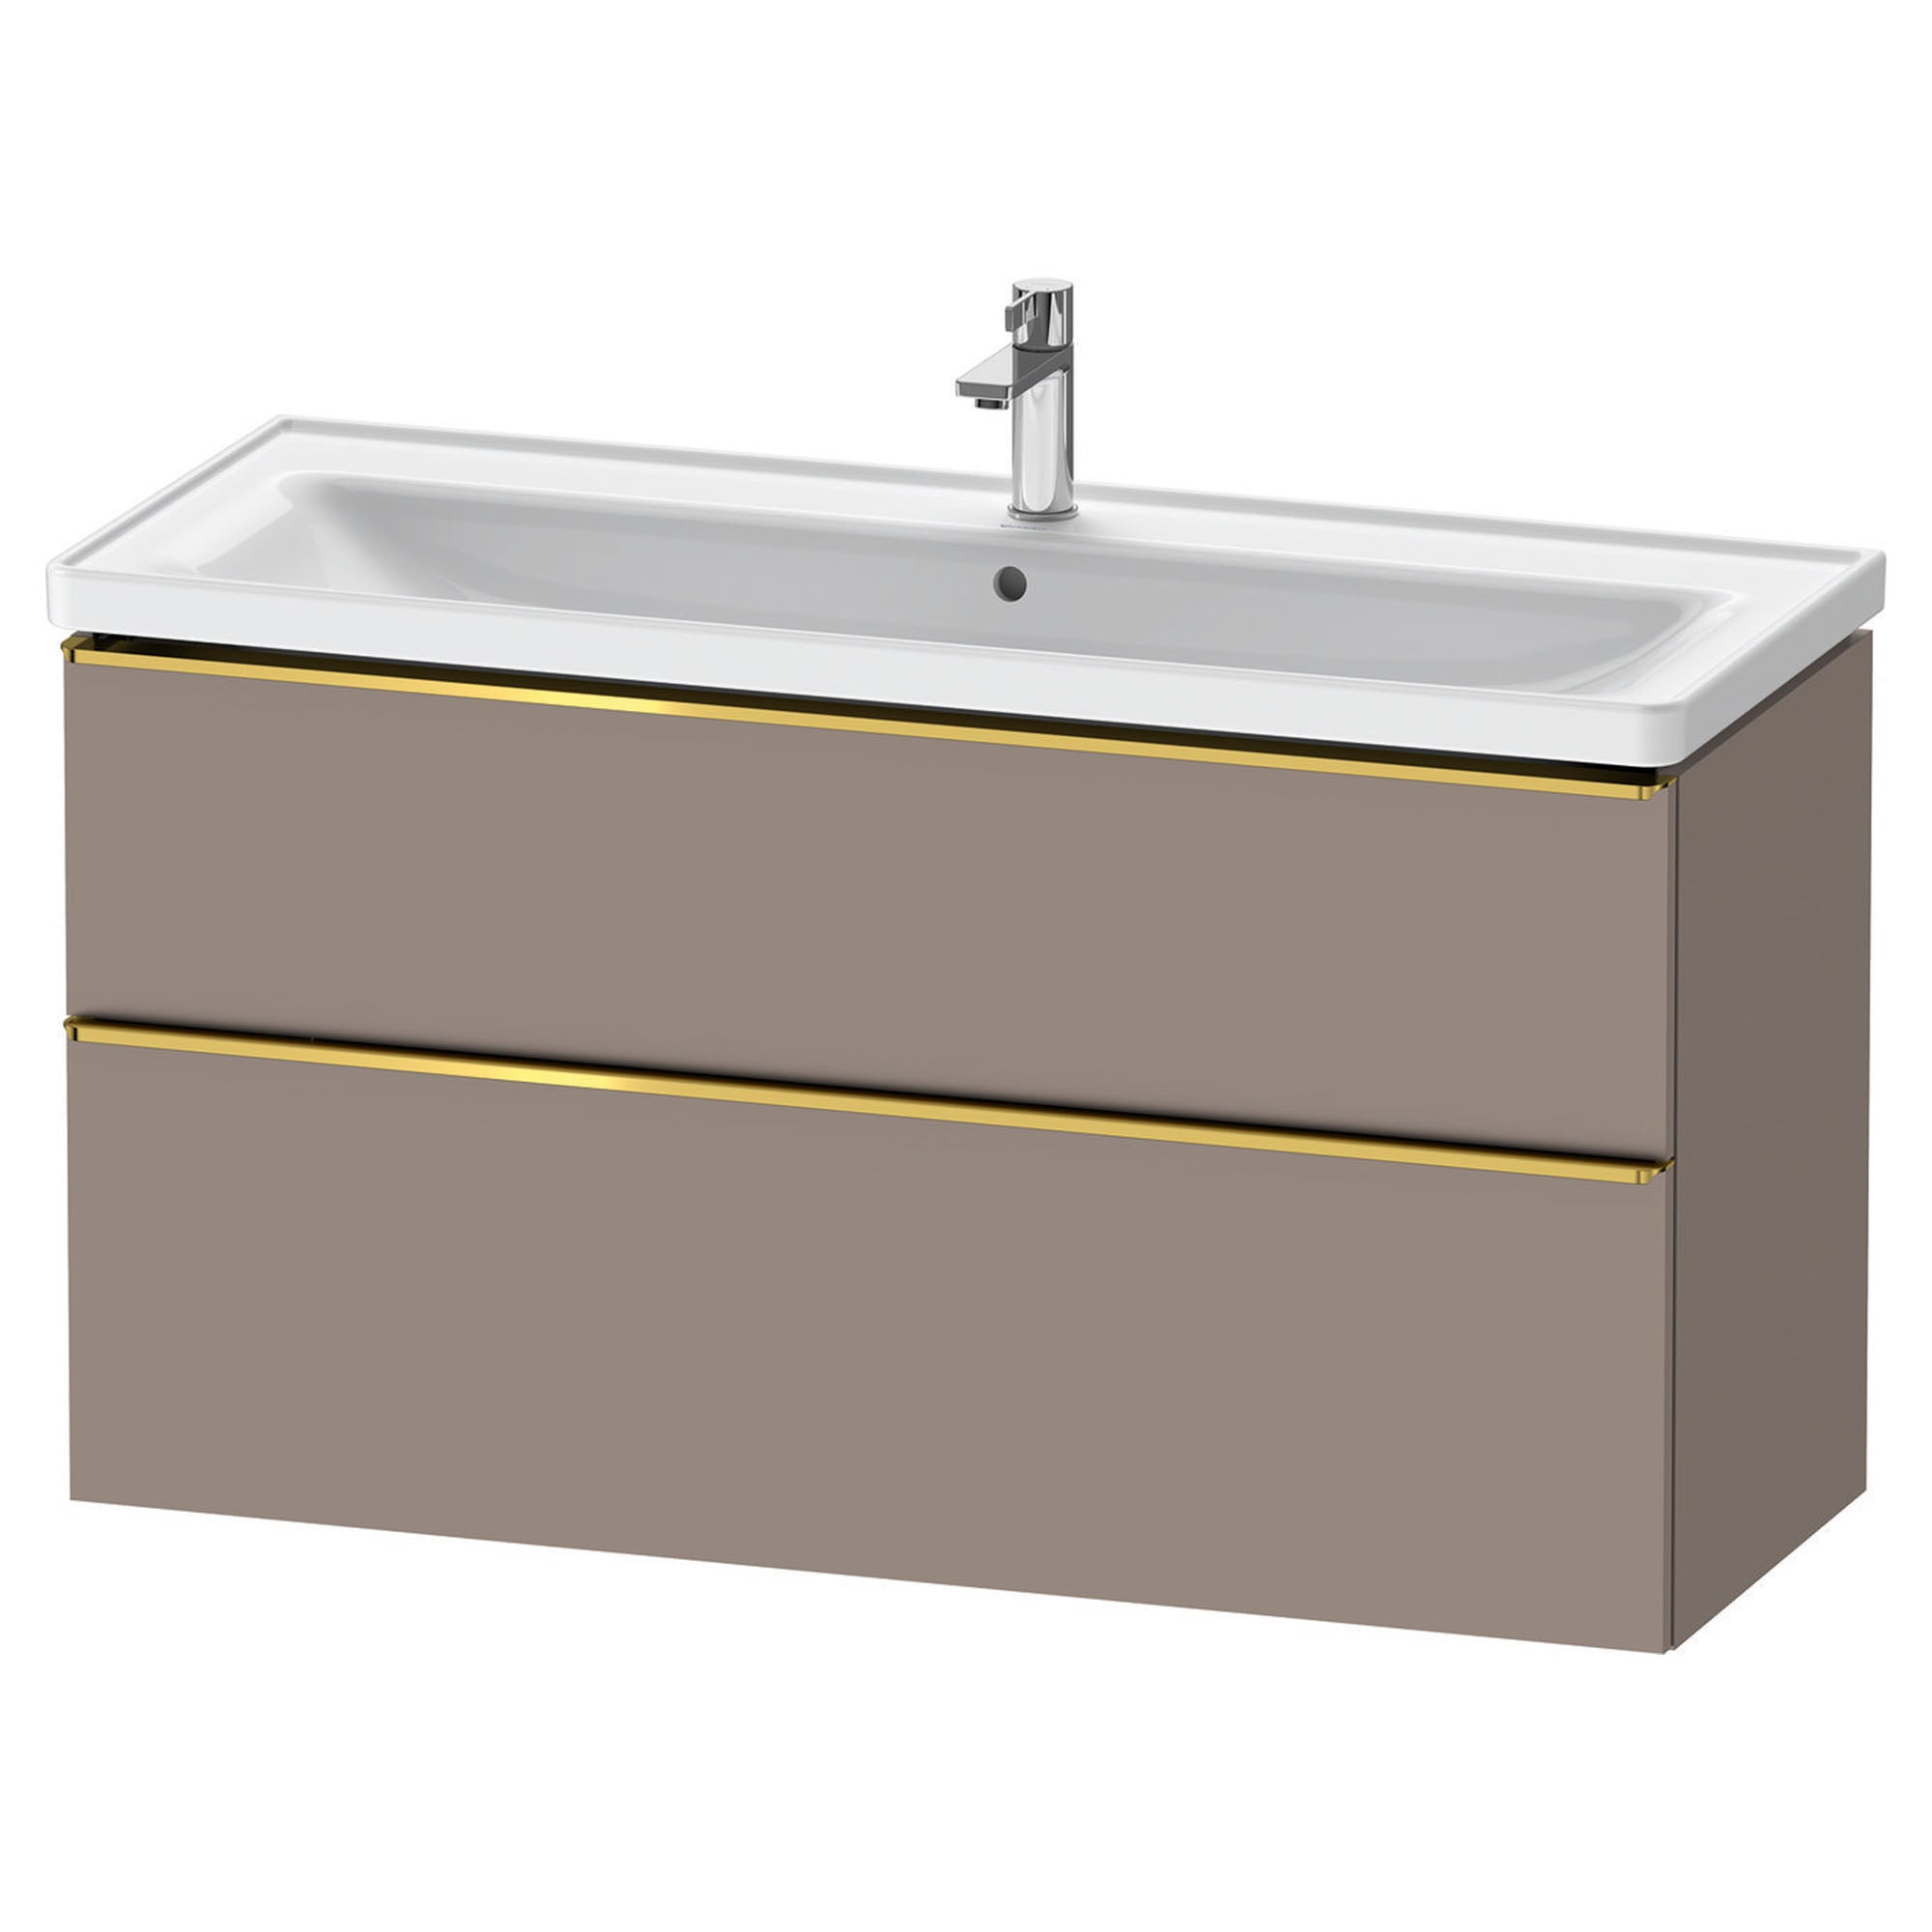 duravit d-neo 1200mm wall mounted vanity unit with d-neo basin basalt gold handles